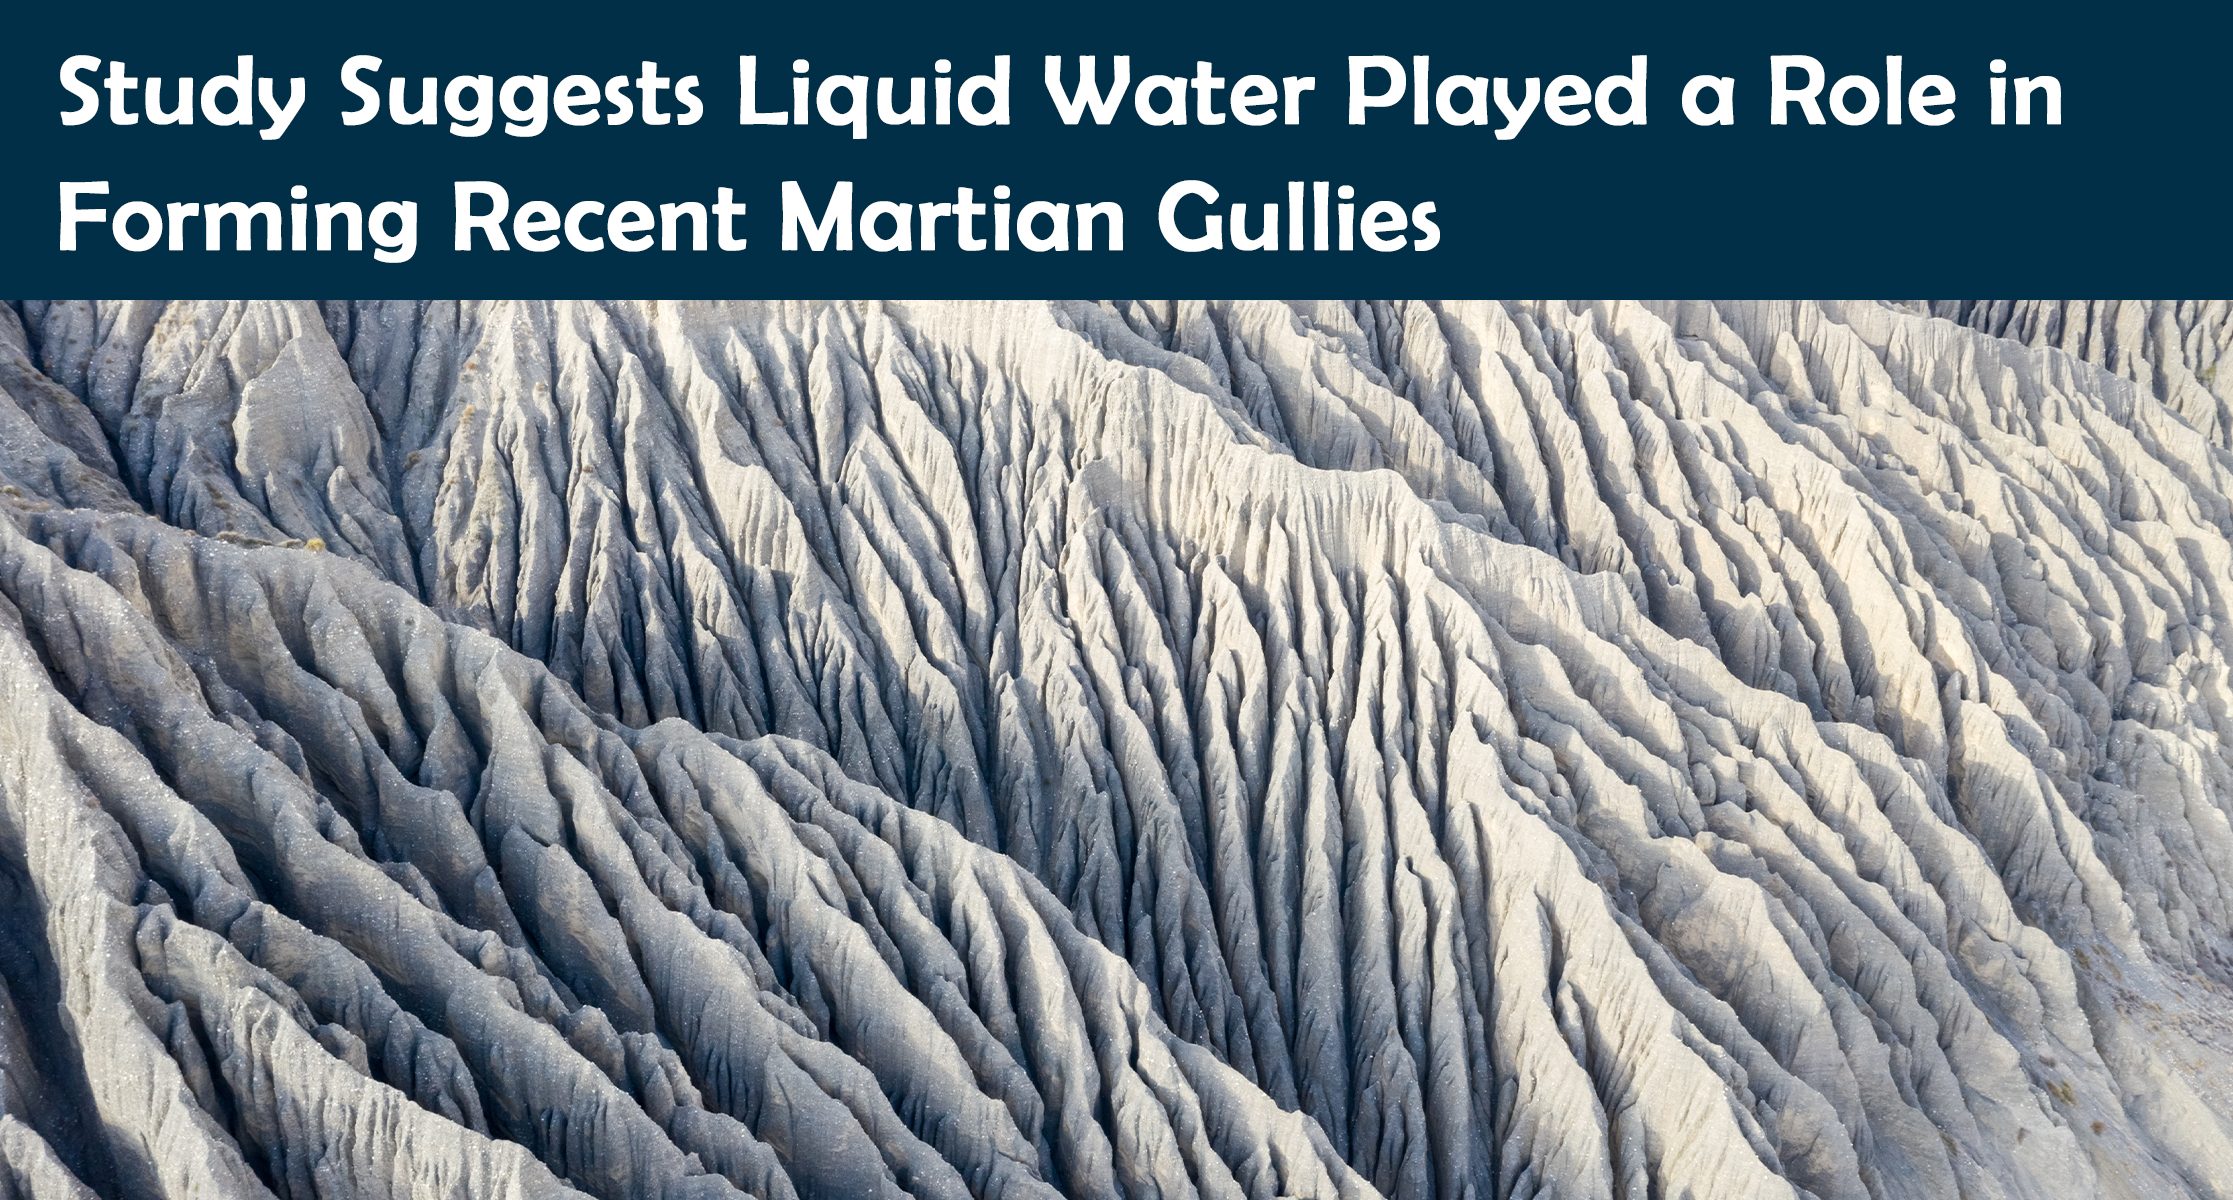 Study Suggests Liquid Water Played a Role in Forming Recent Martian Gullies